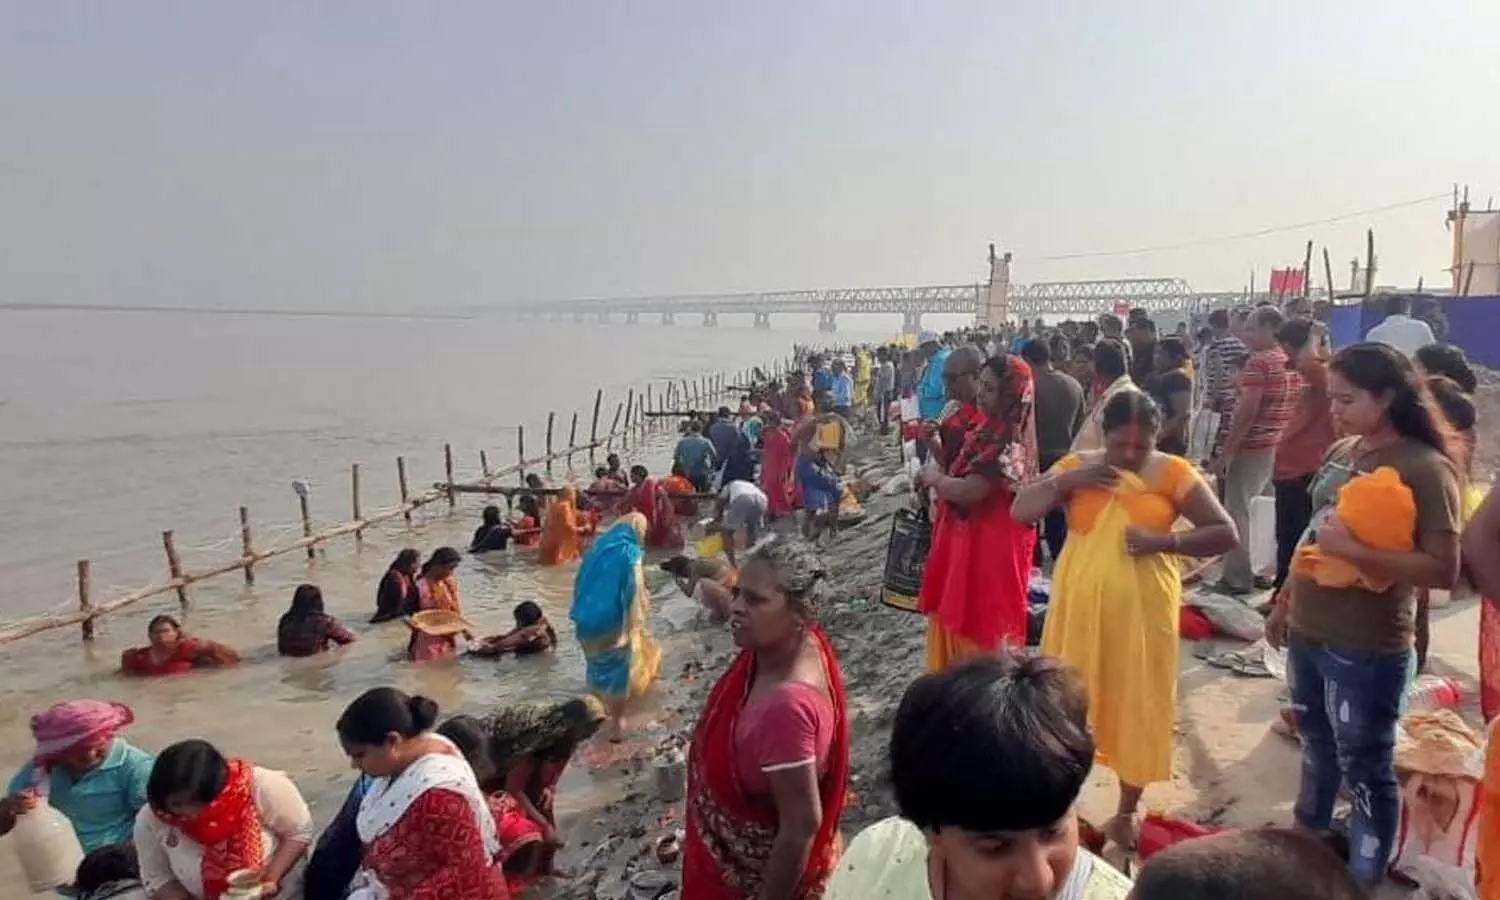 Chhath, the great festival of folk faith begins with bathing, crowds of devotees gathered at the Ganges Ghats